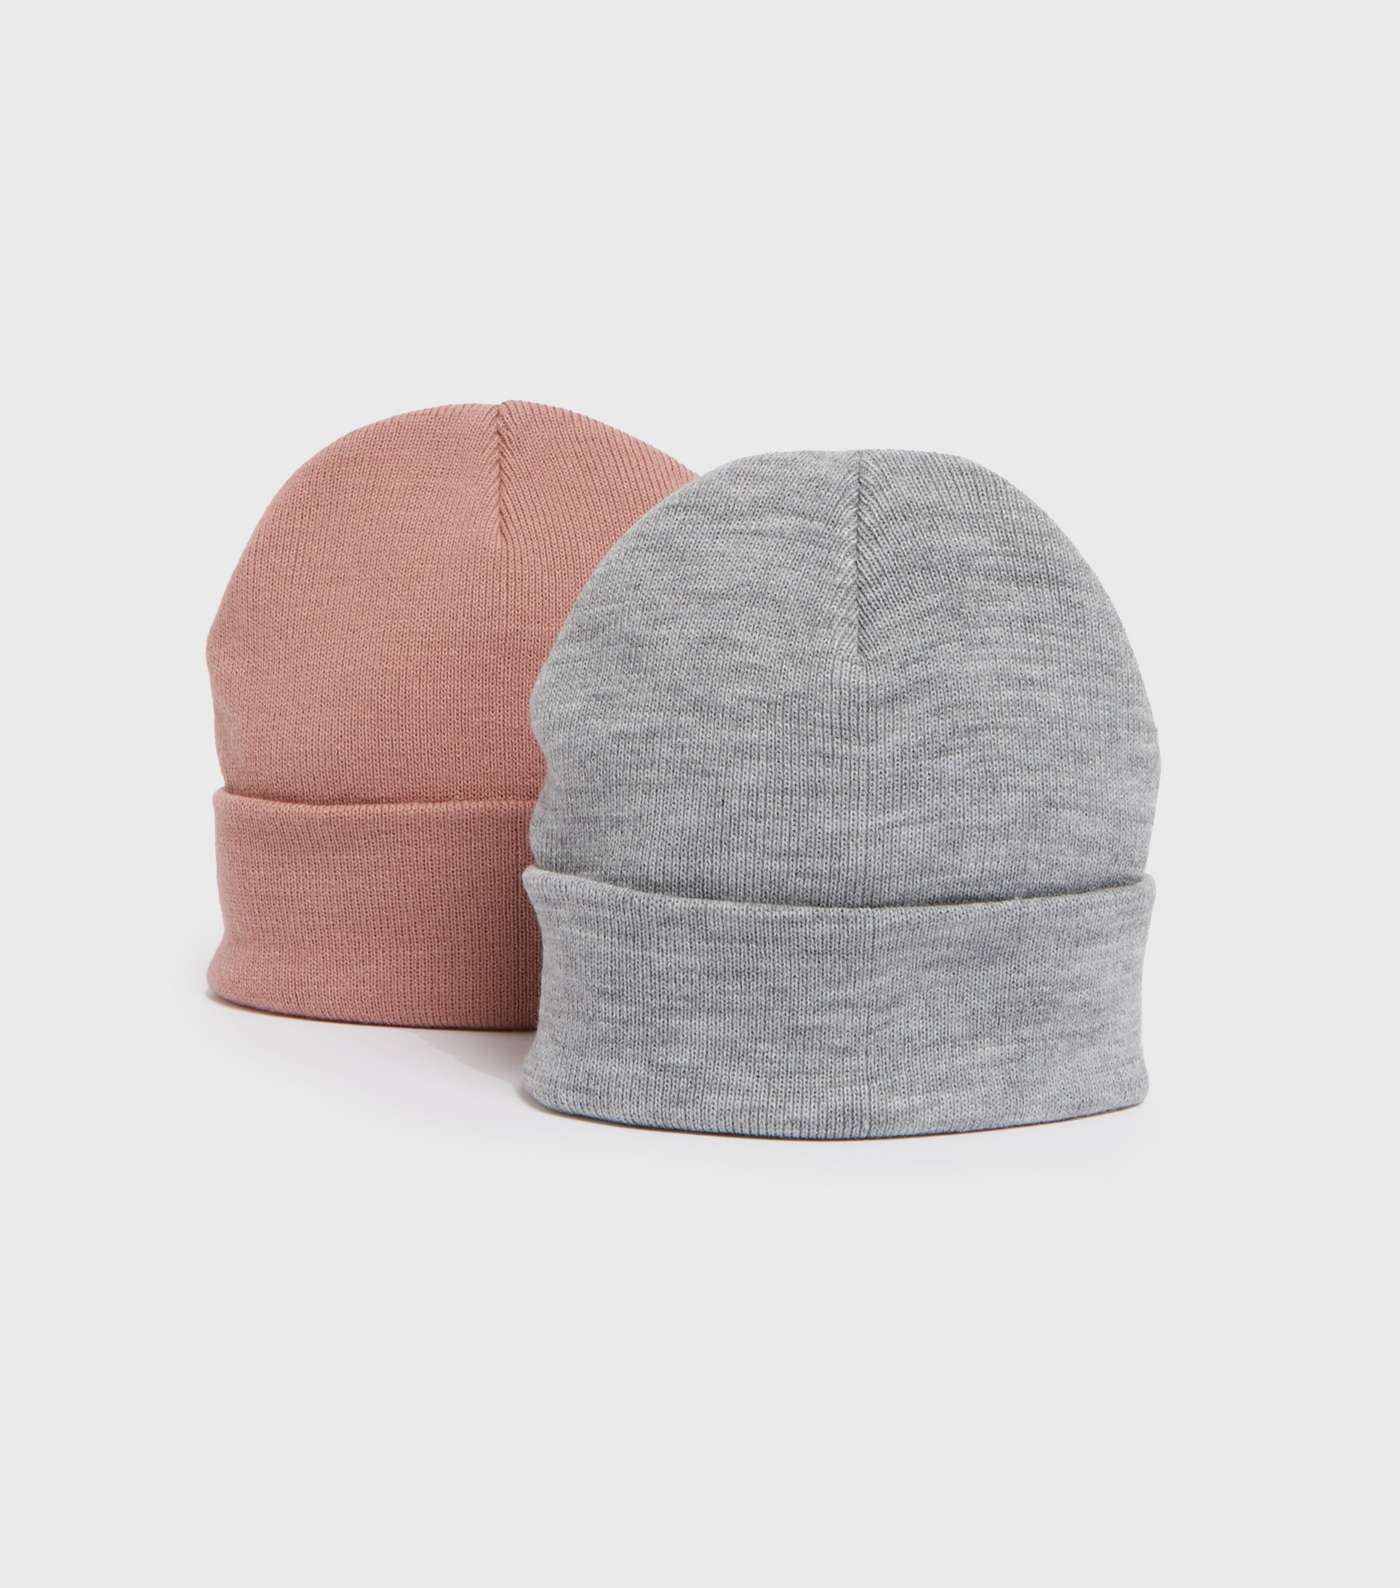 2 Pack Pink and Grey Knit Beanies